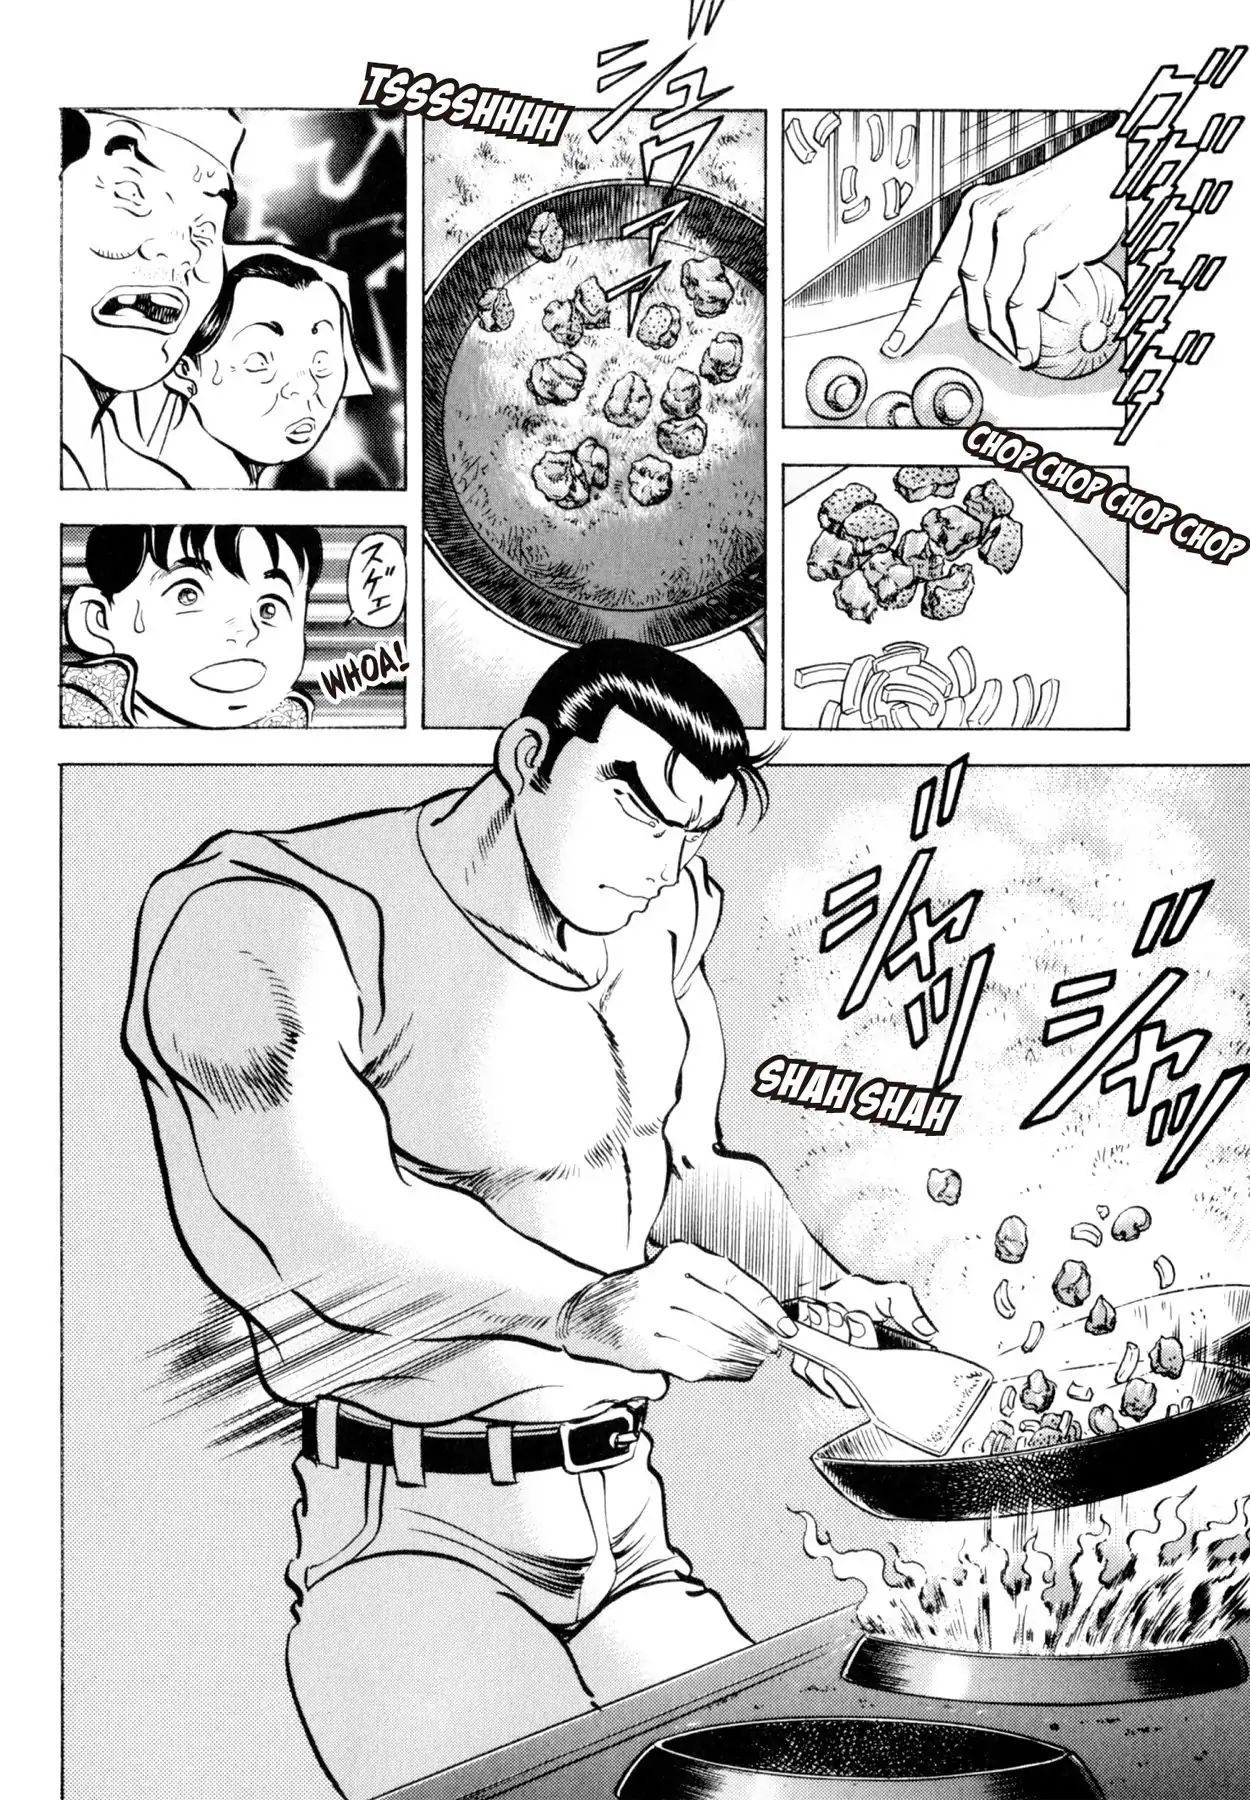 Shoku King VOL.1 CHAPTER 6: THE STUBBORN CHINESE RESTAURANT